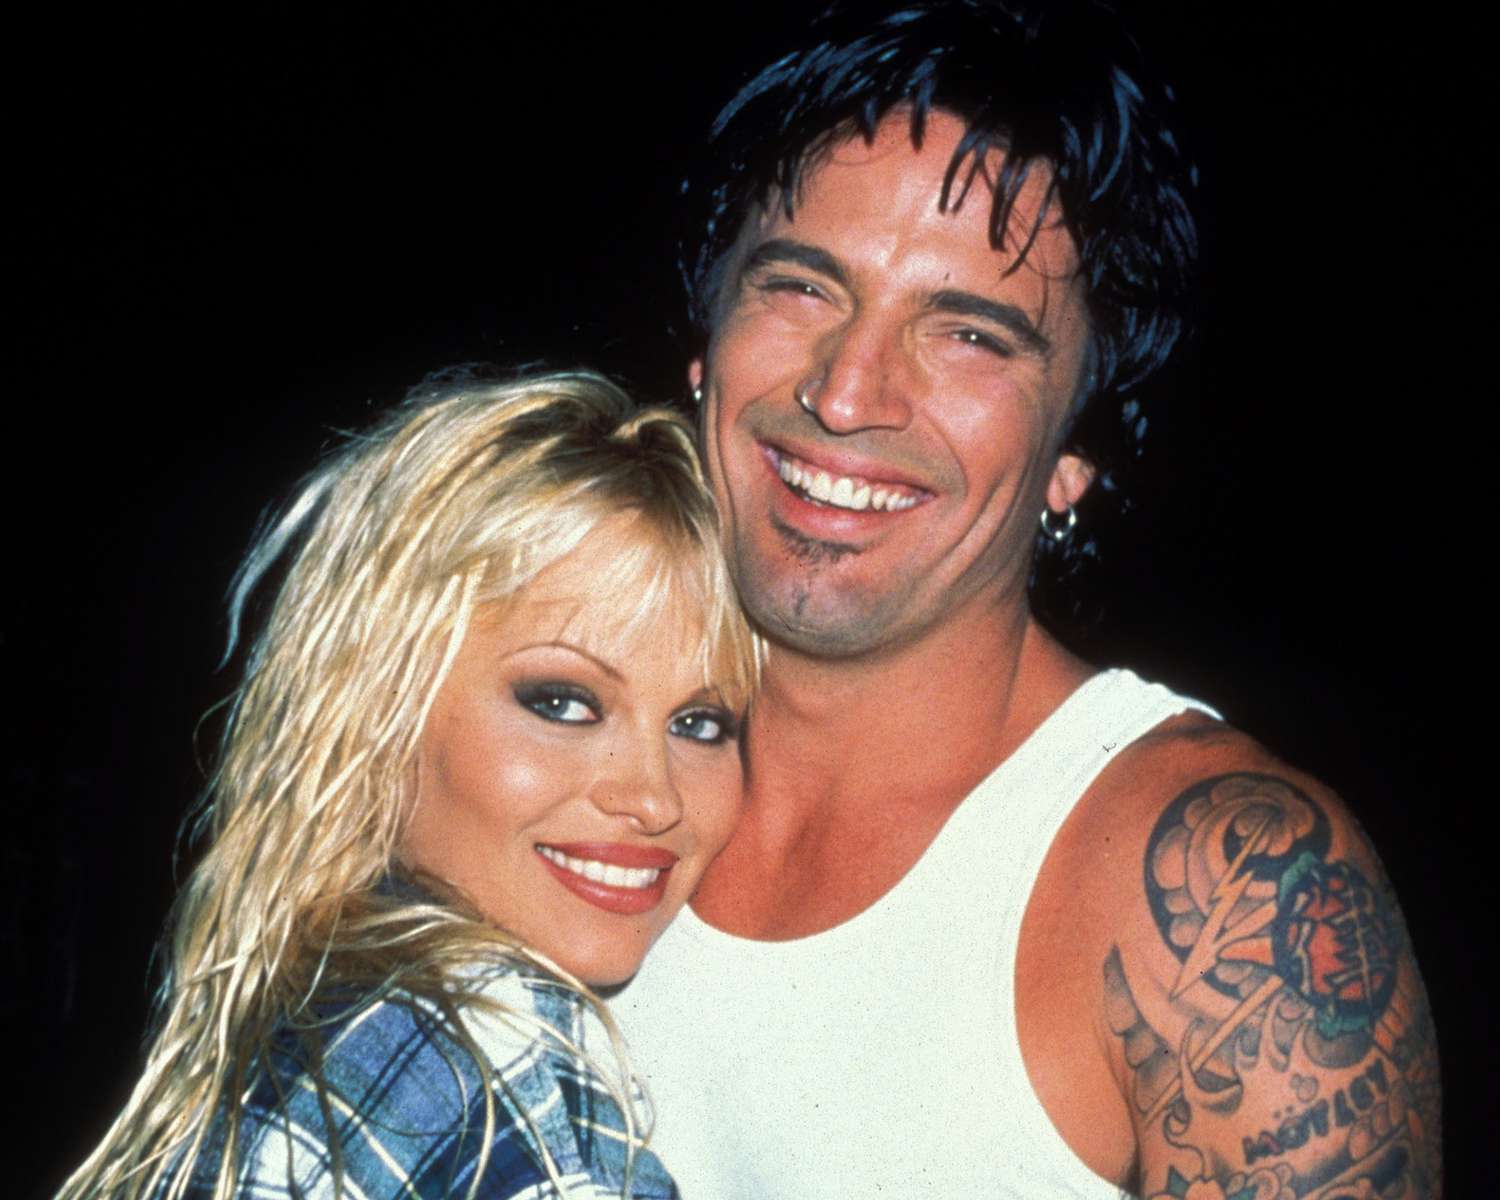 Pamela Anderson with her ex-husband, Tommy Lee